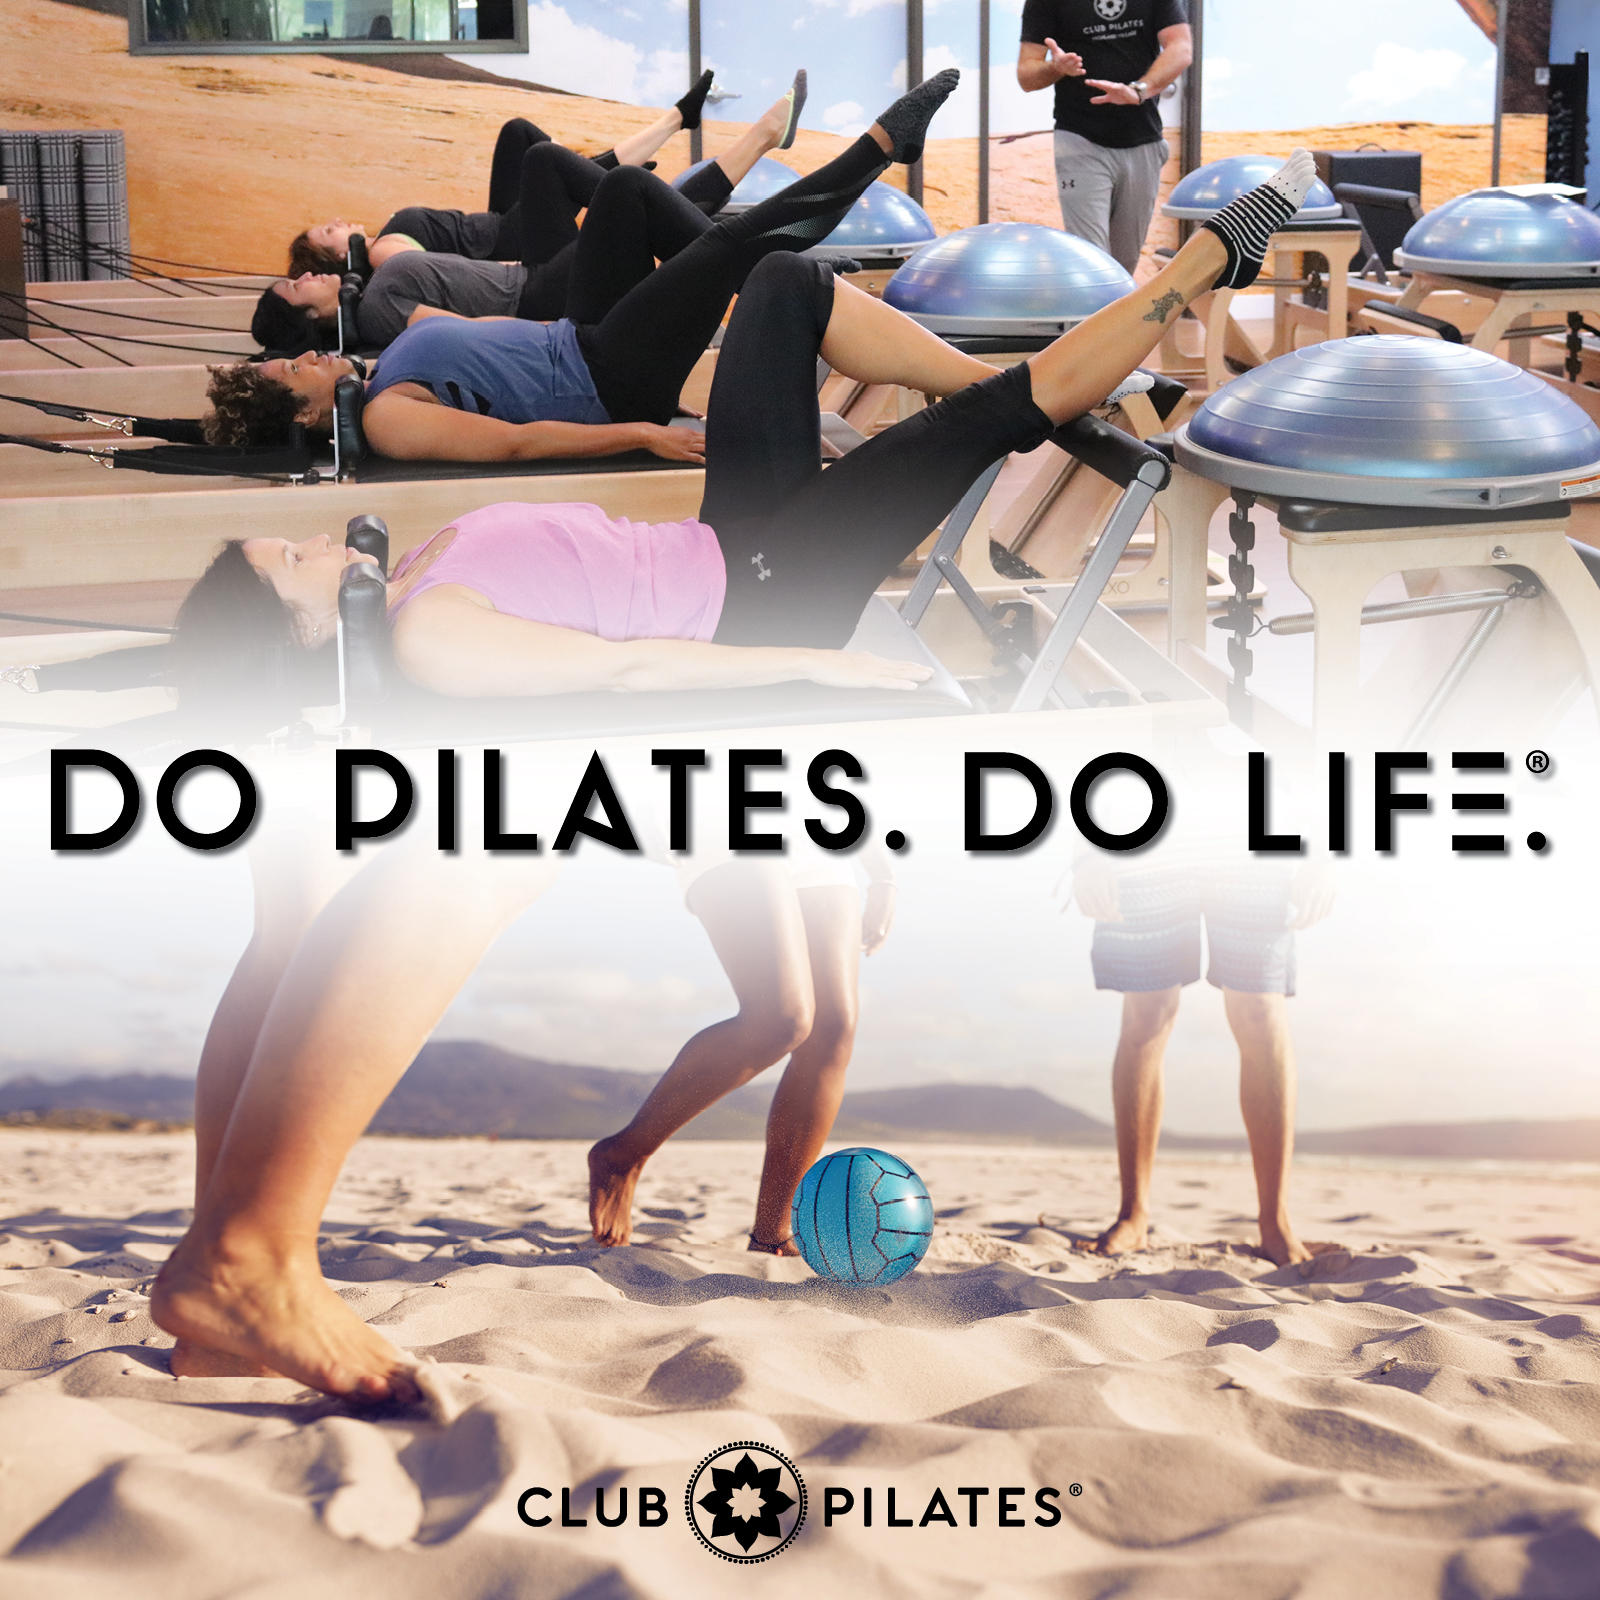 Call us now to receive up to 20% off on your membership! Club Pilates Woodbury (646)907-9626